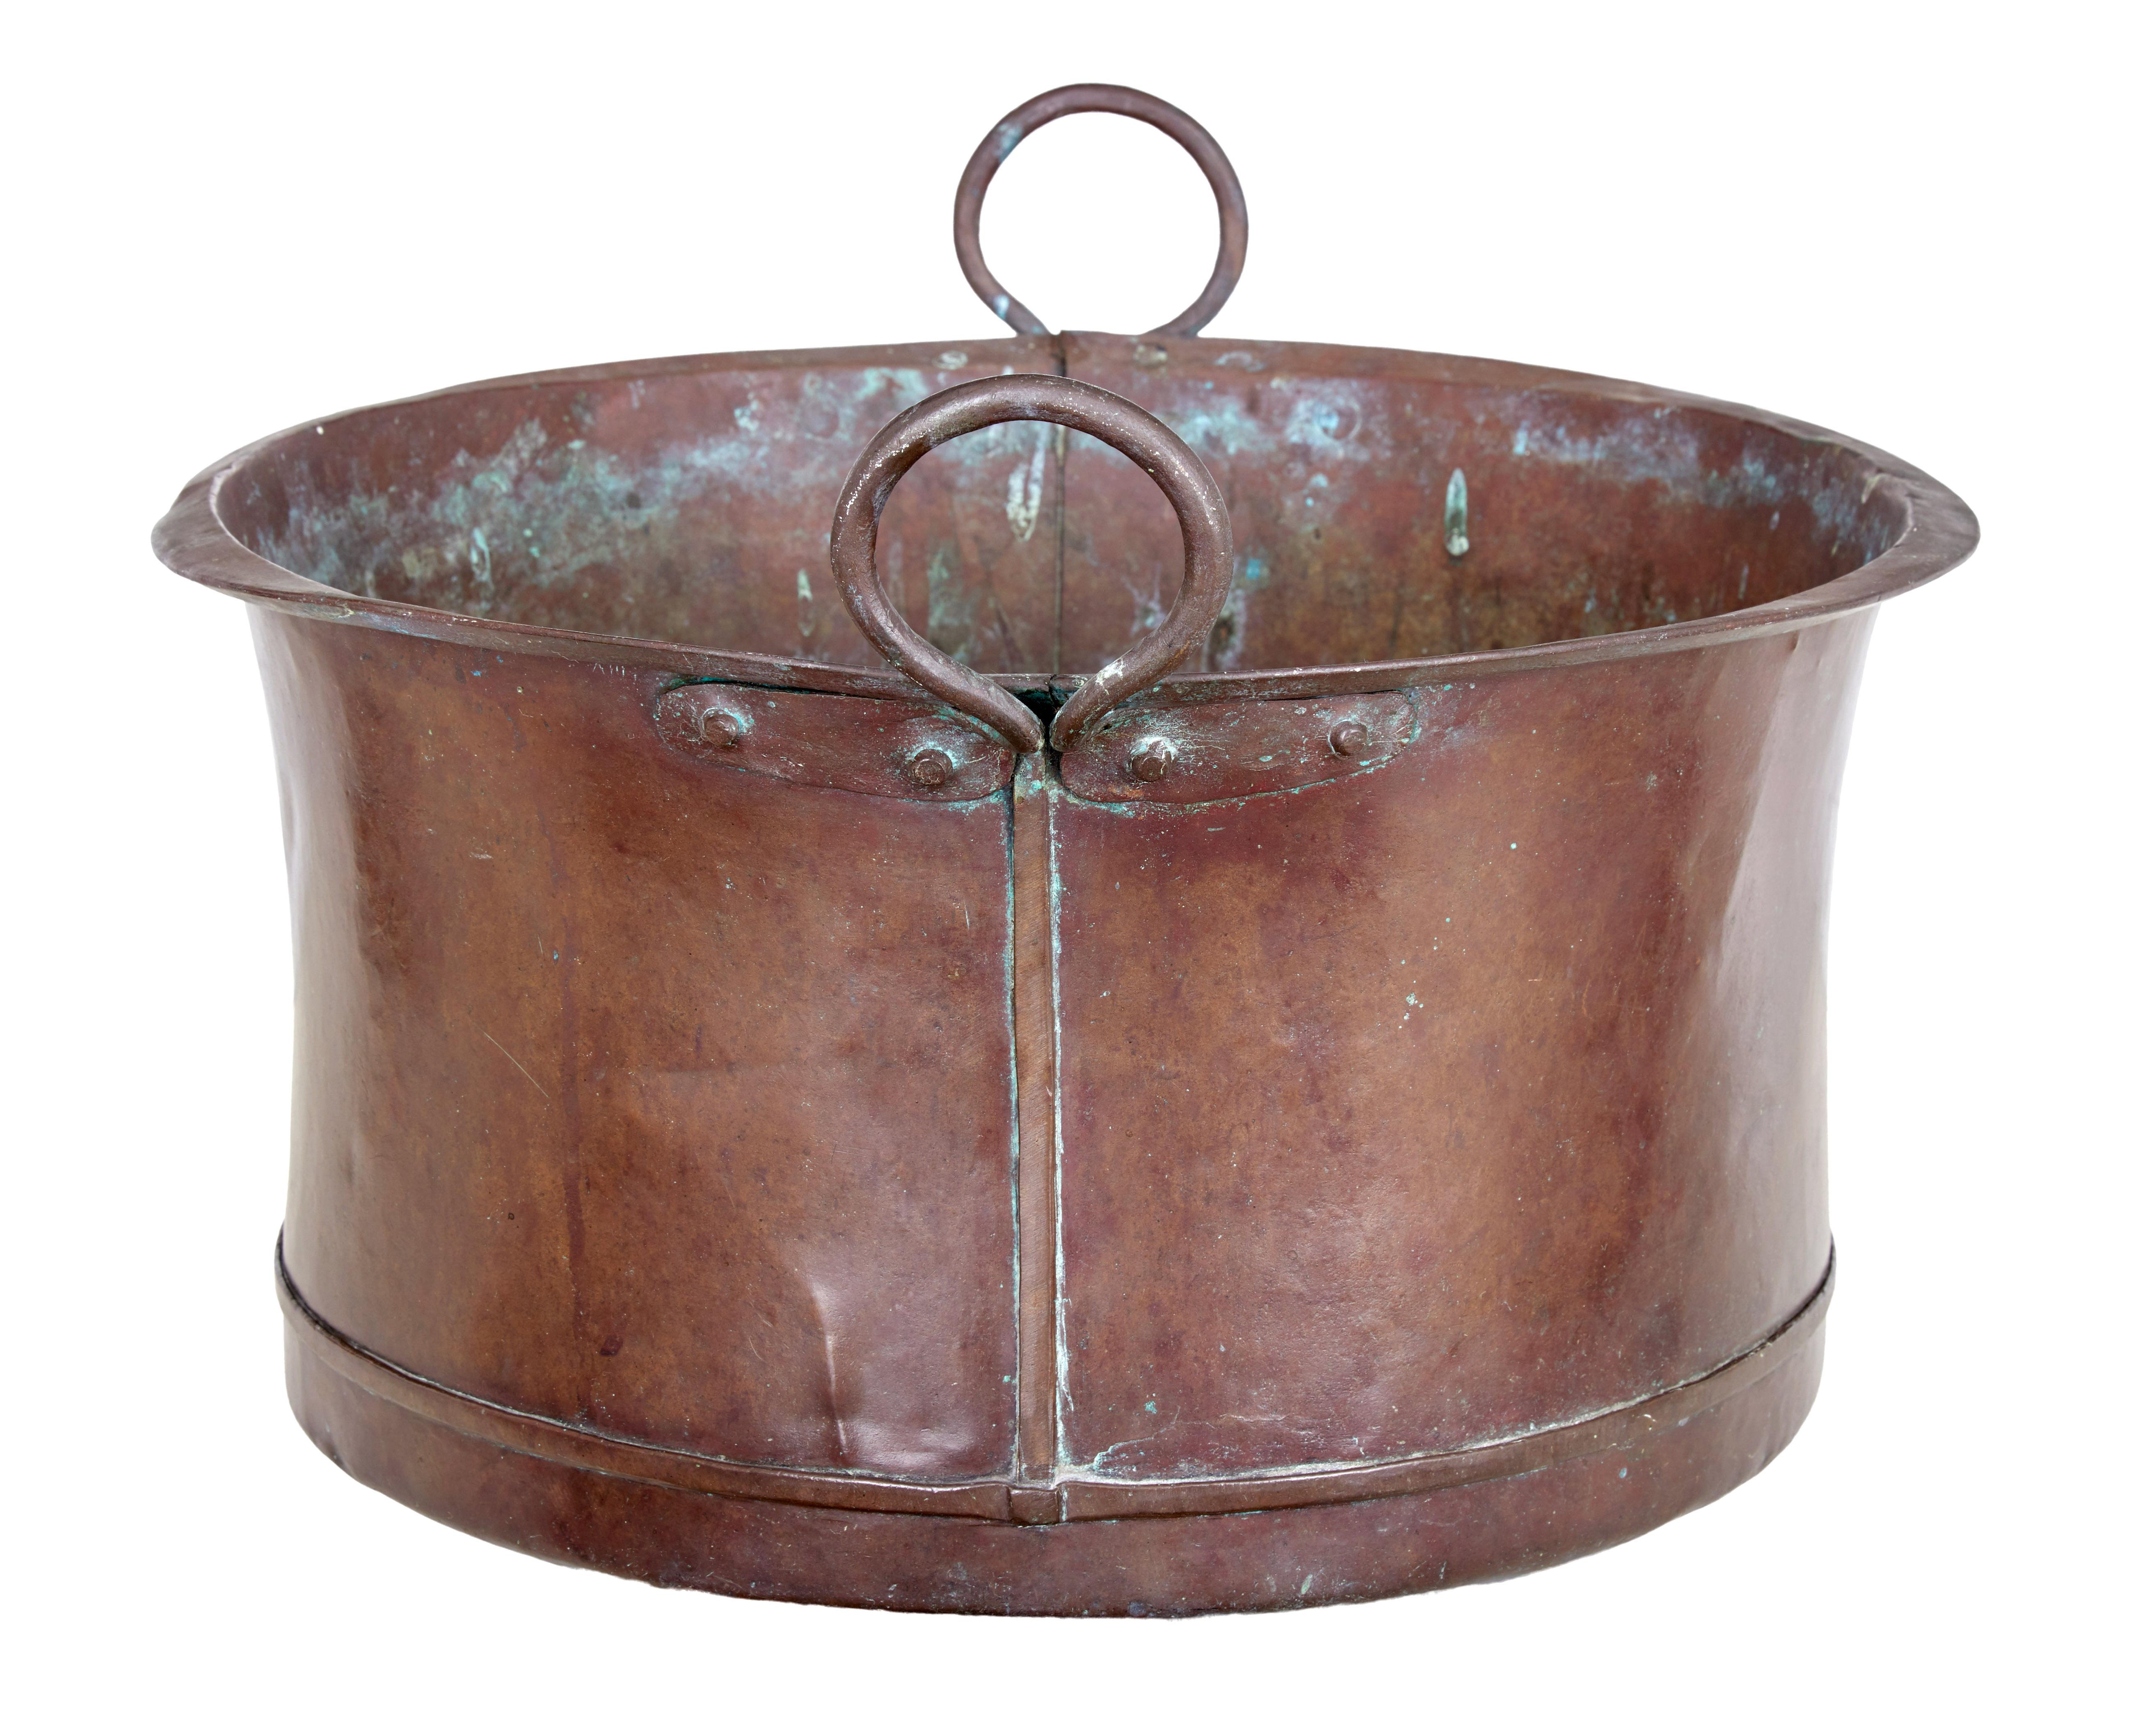 Large Victorian 19th century copper cooking vessel circa 1890.

Rustic rounded bottom cooking vessel, which would now make an ideal log or waste paper bin.

Round in shaped with large hooped handles.

Expected surface marks and minor